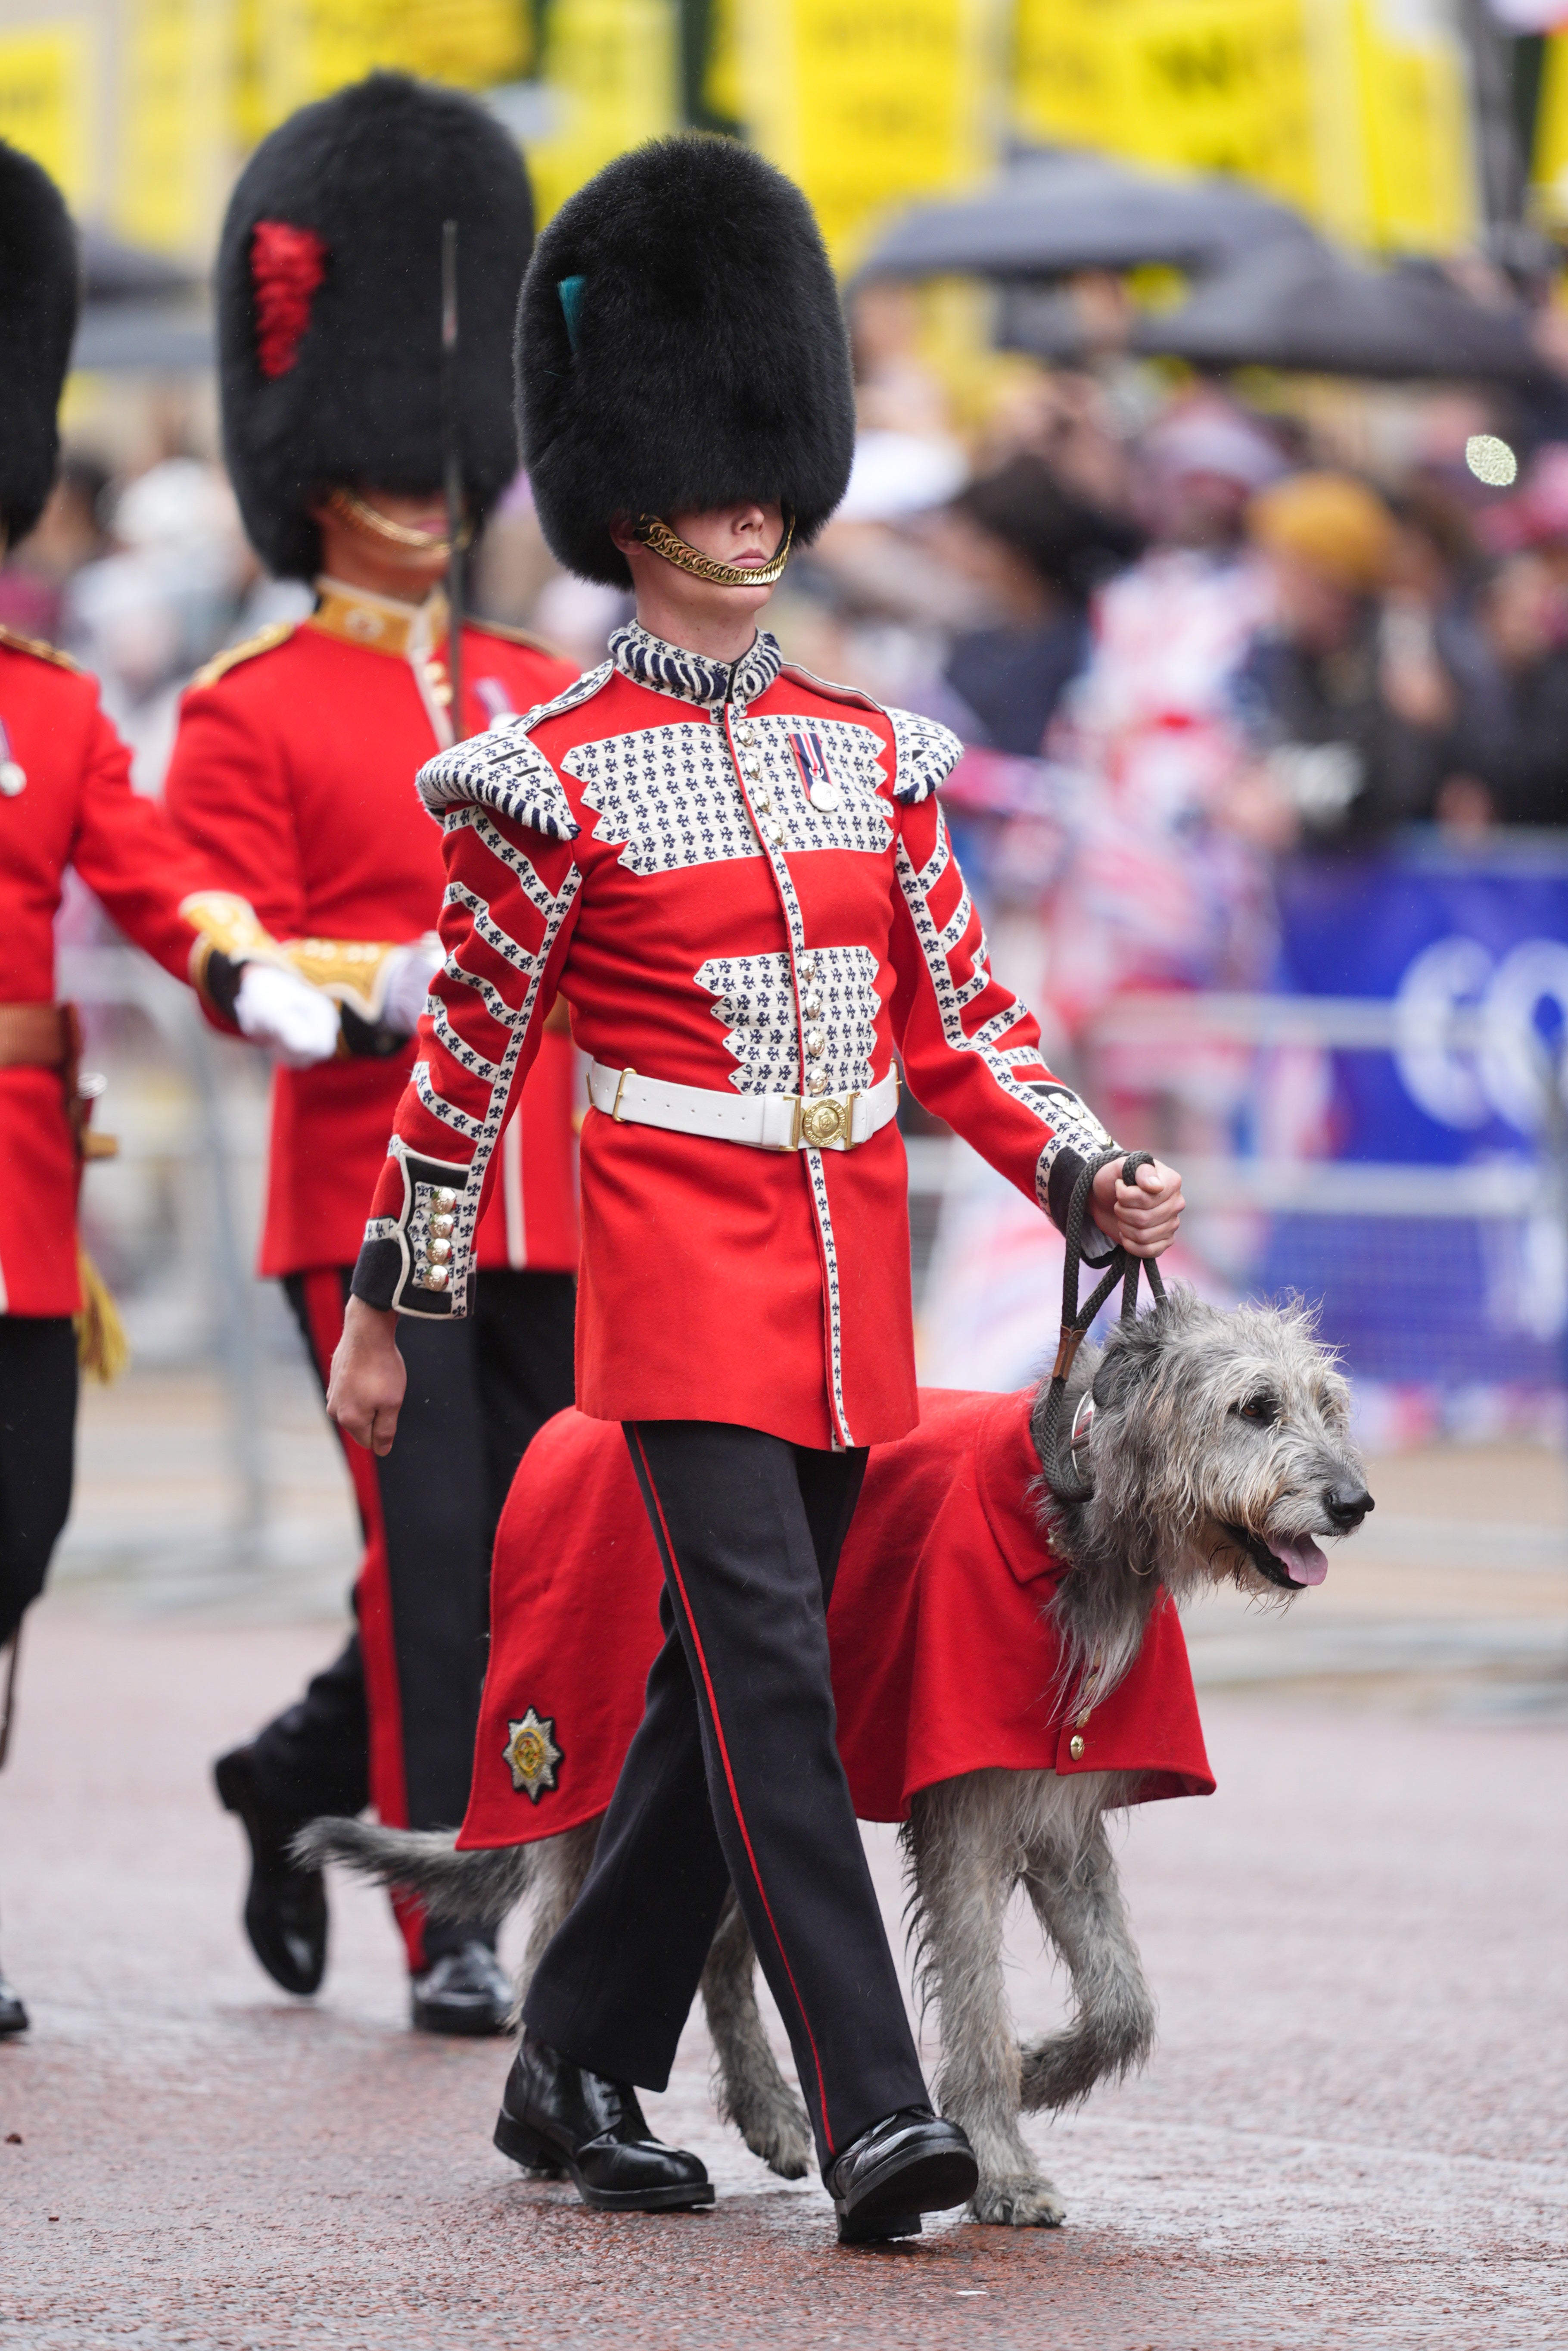 The official mascot of the Irish Guard, a wolfhound Seamus has been a mascot at the event for three years